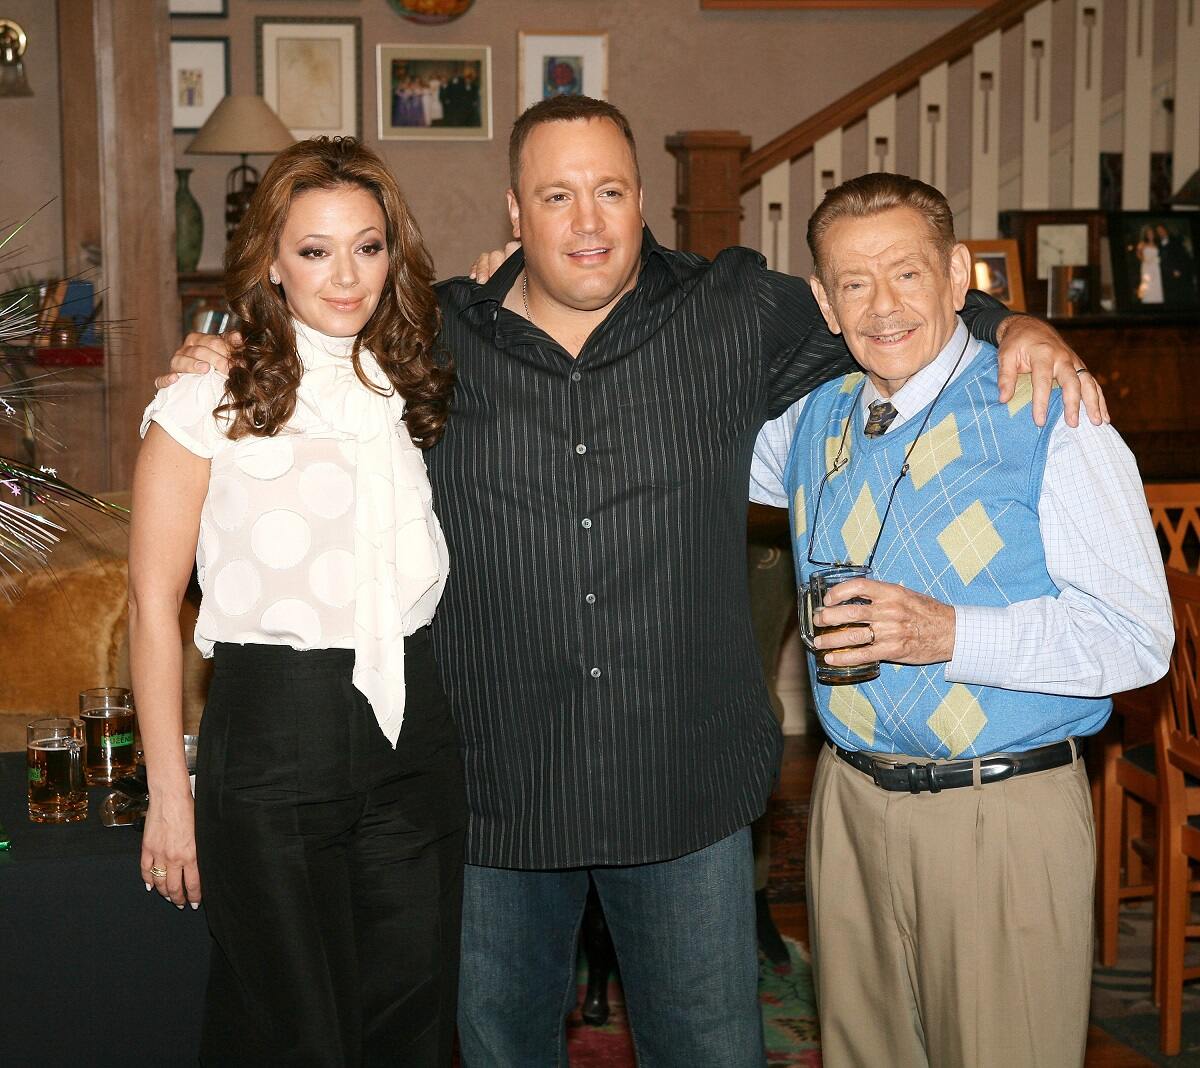 Leah Remini, Kevin James and Jerry Stiller pose togther in the Heffernens' living room for 'King of Queens.' The series had several glaring continuity errors.